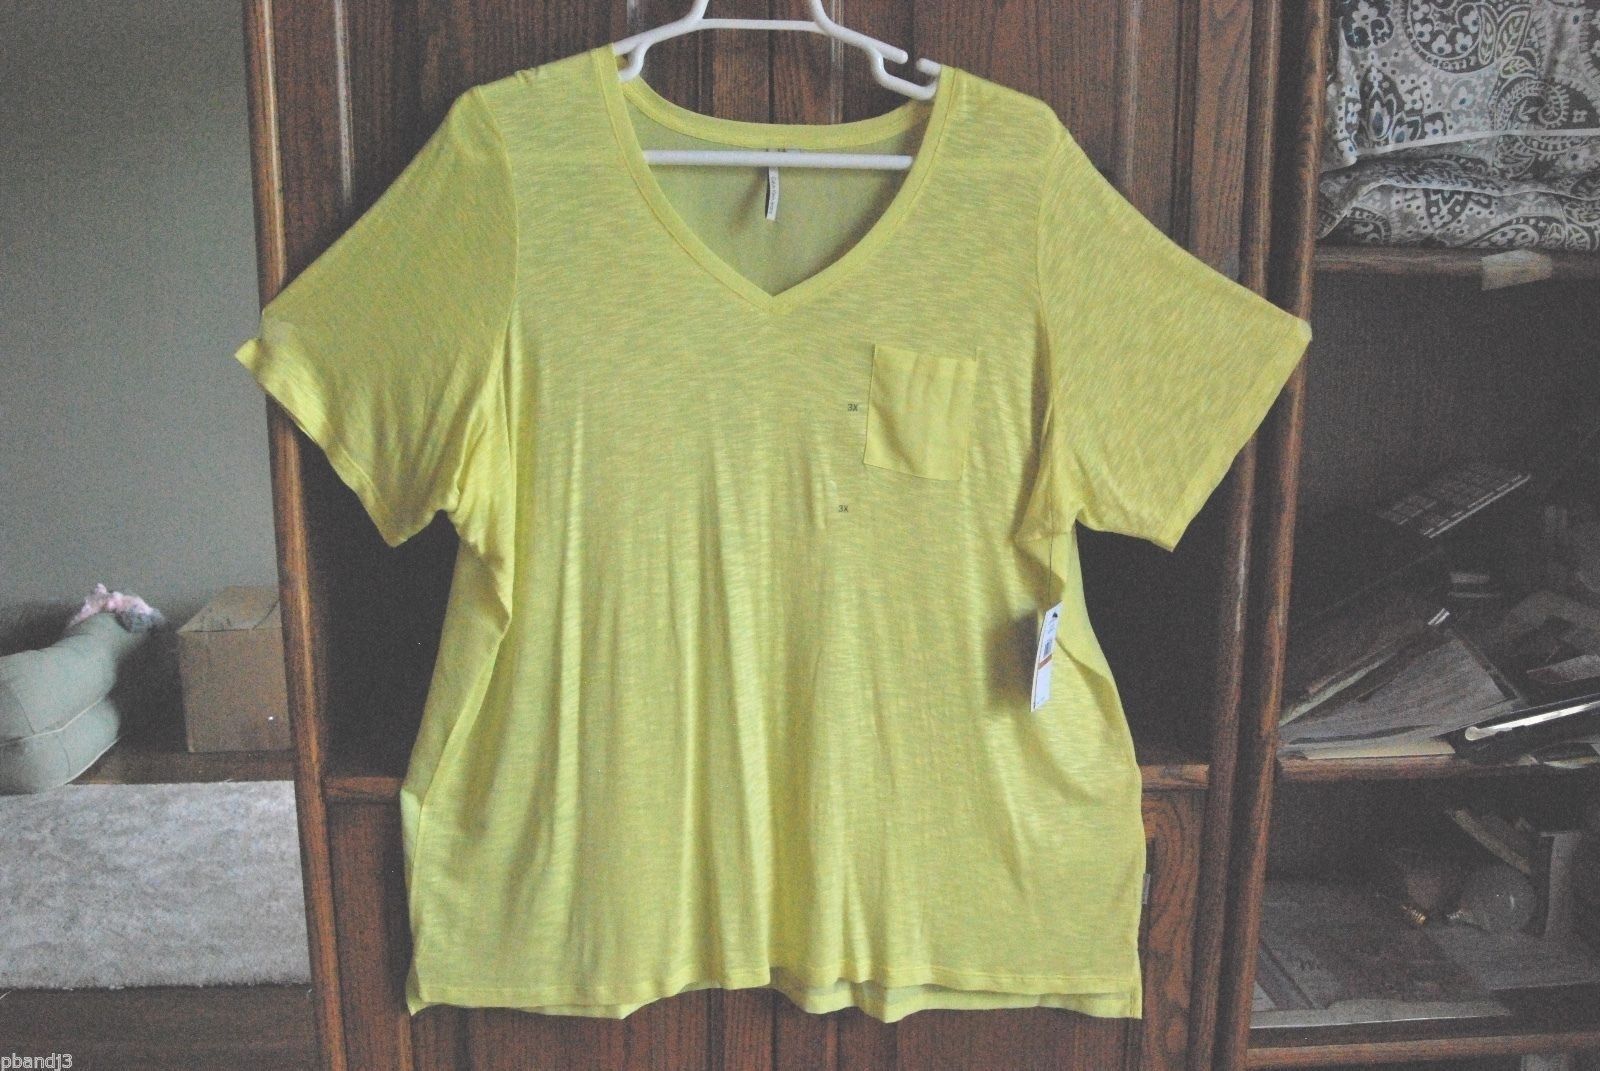 Calvin Klein 3X Shirt Top, Variegated Yellow and Solid Weave - $37.00